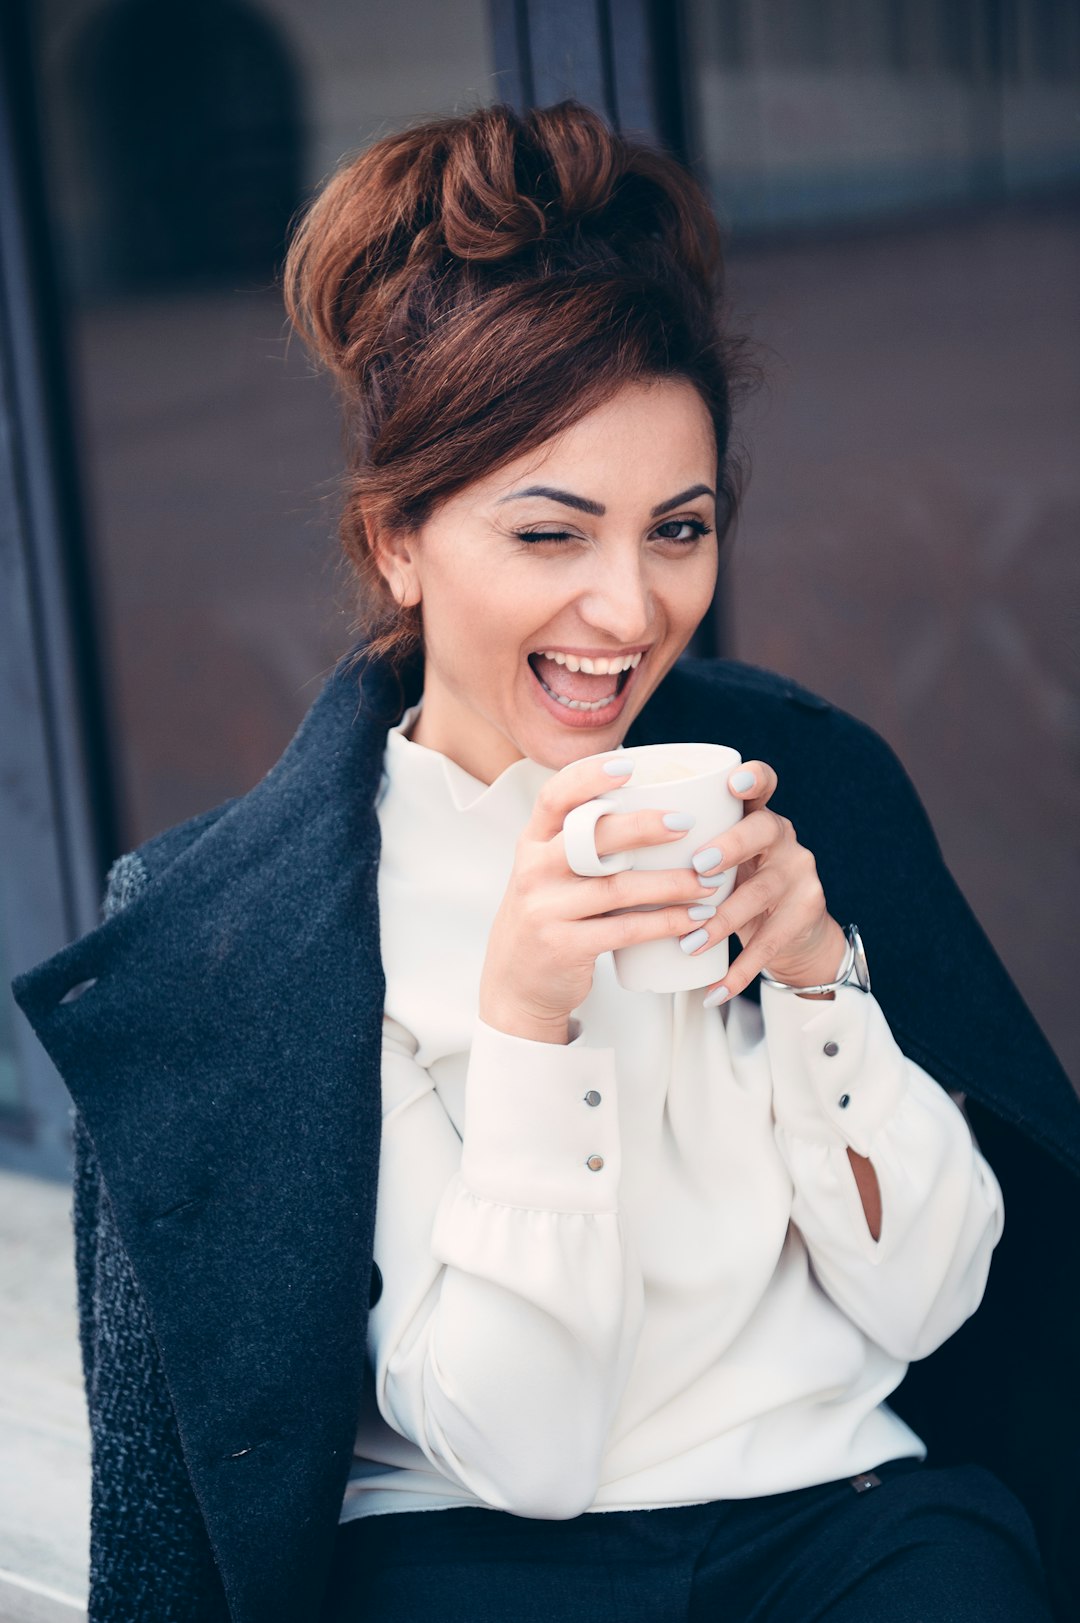 woman holding a coffee cup winking